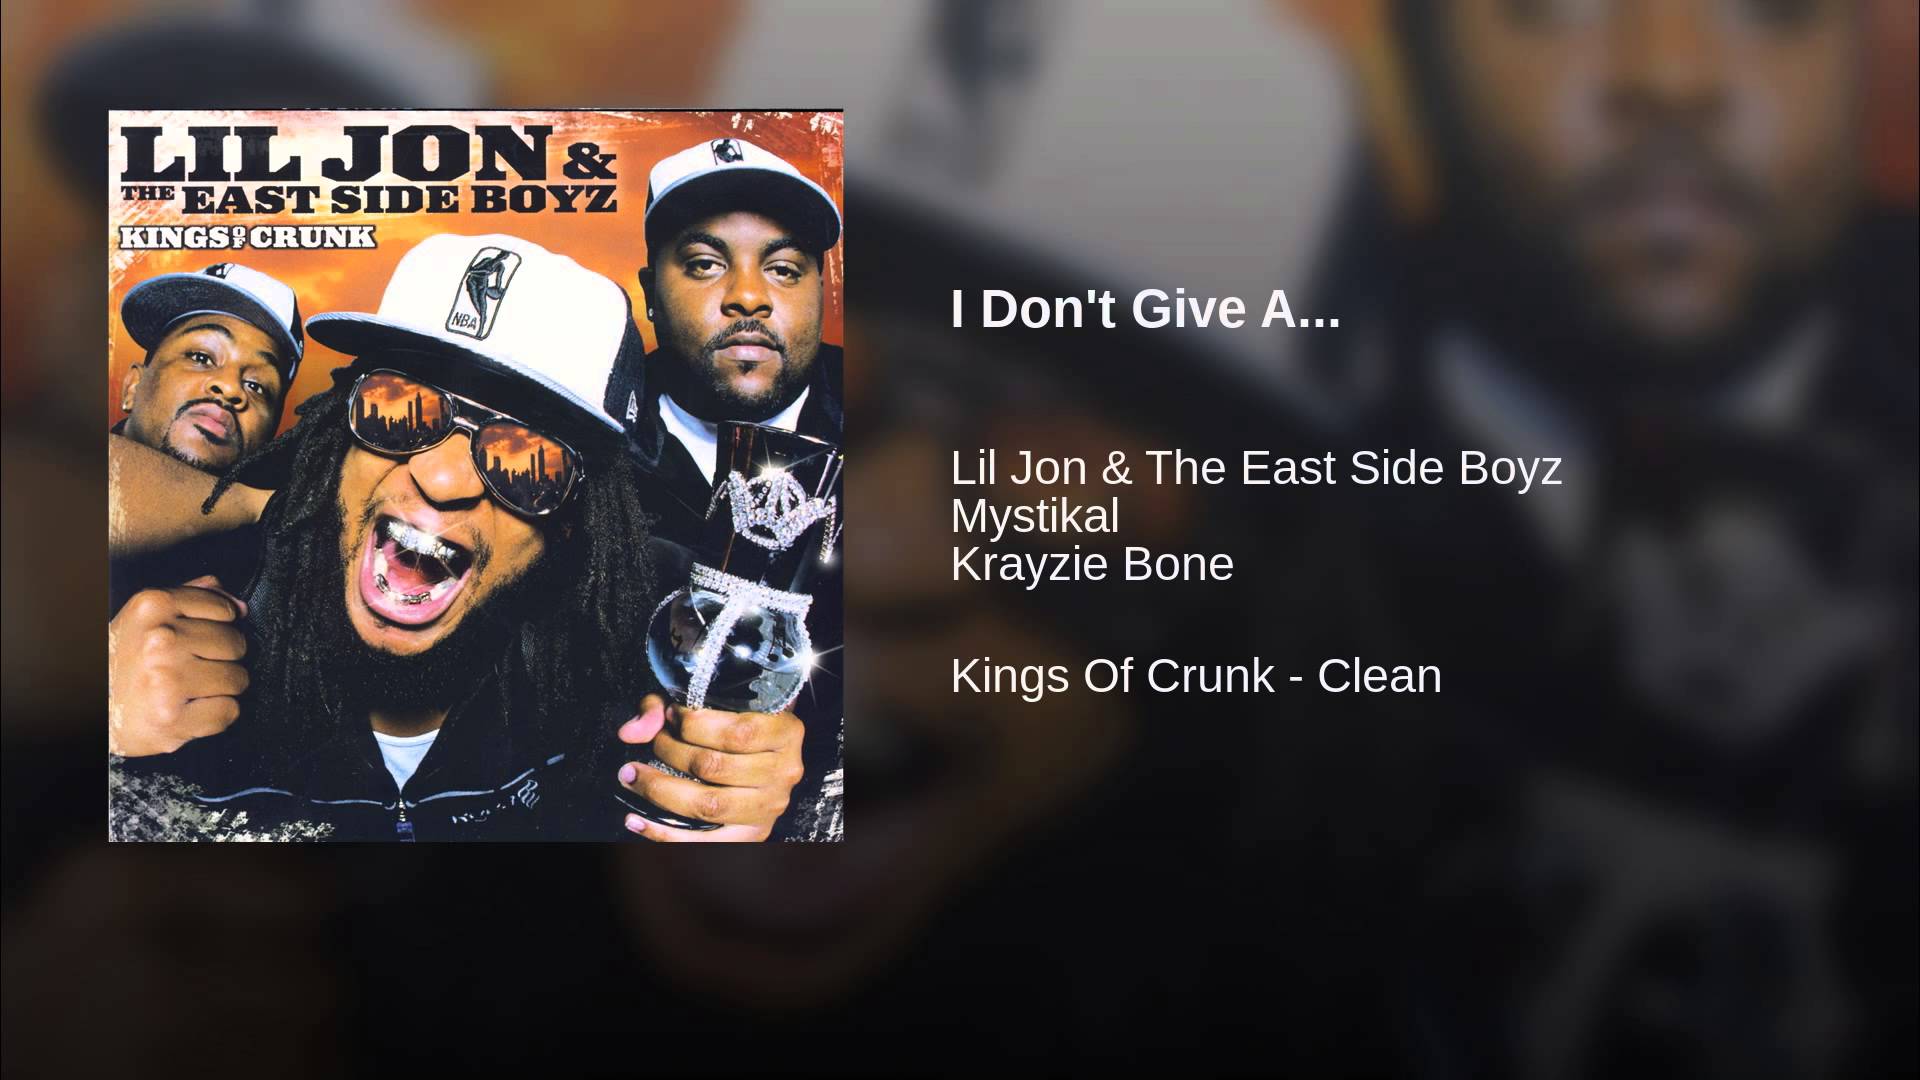 Get low текст. Kings of Crunk Lil Jon & the East Side Boyz. Lil Jon the Eastside Boyz get Low. Ying yang Twins, Lil Jon & the East Side Boyz - get Low. Ying yang Twins Lil Jon.